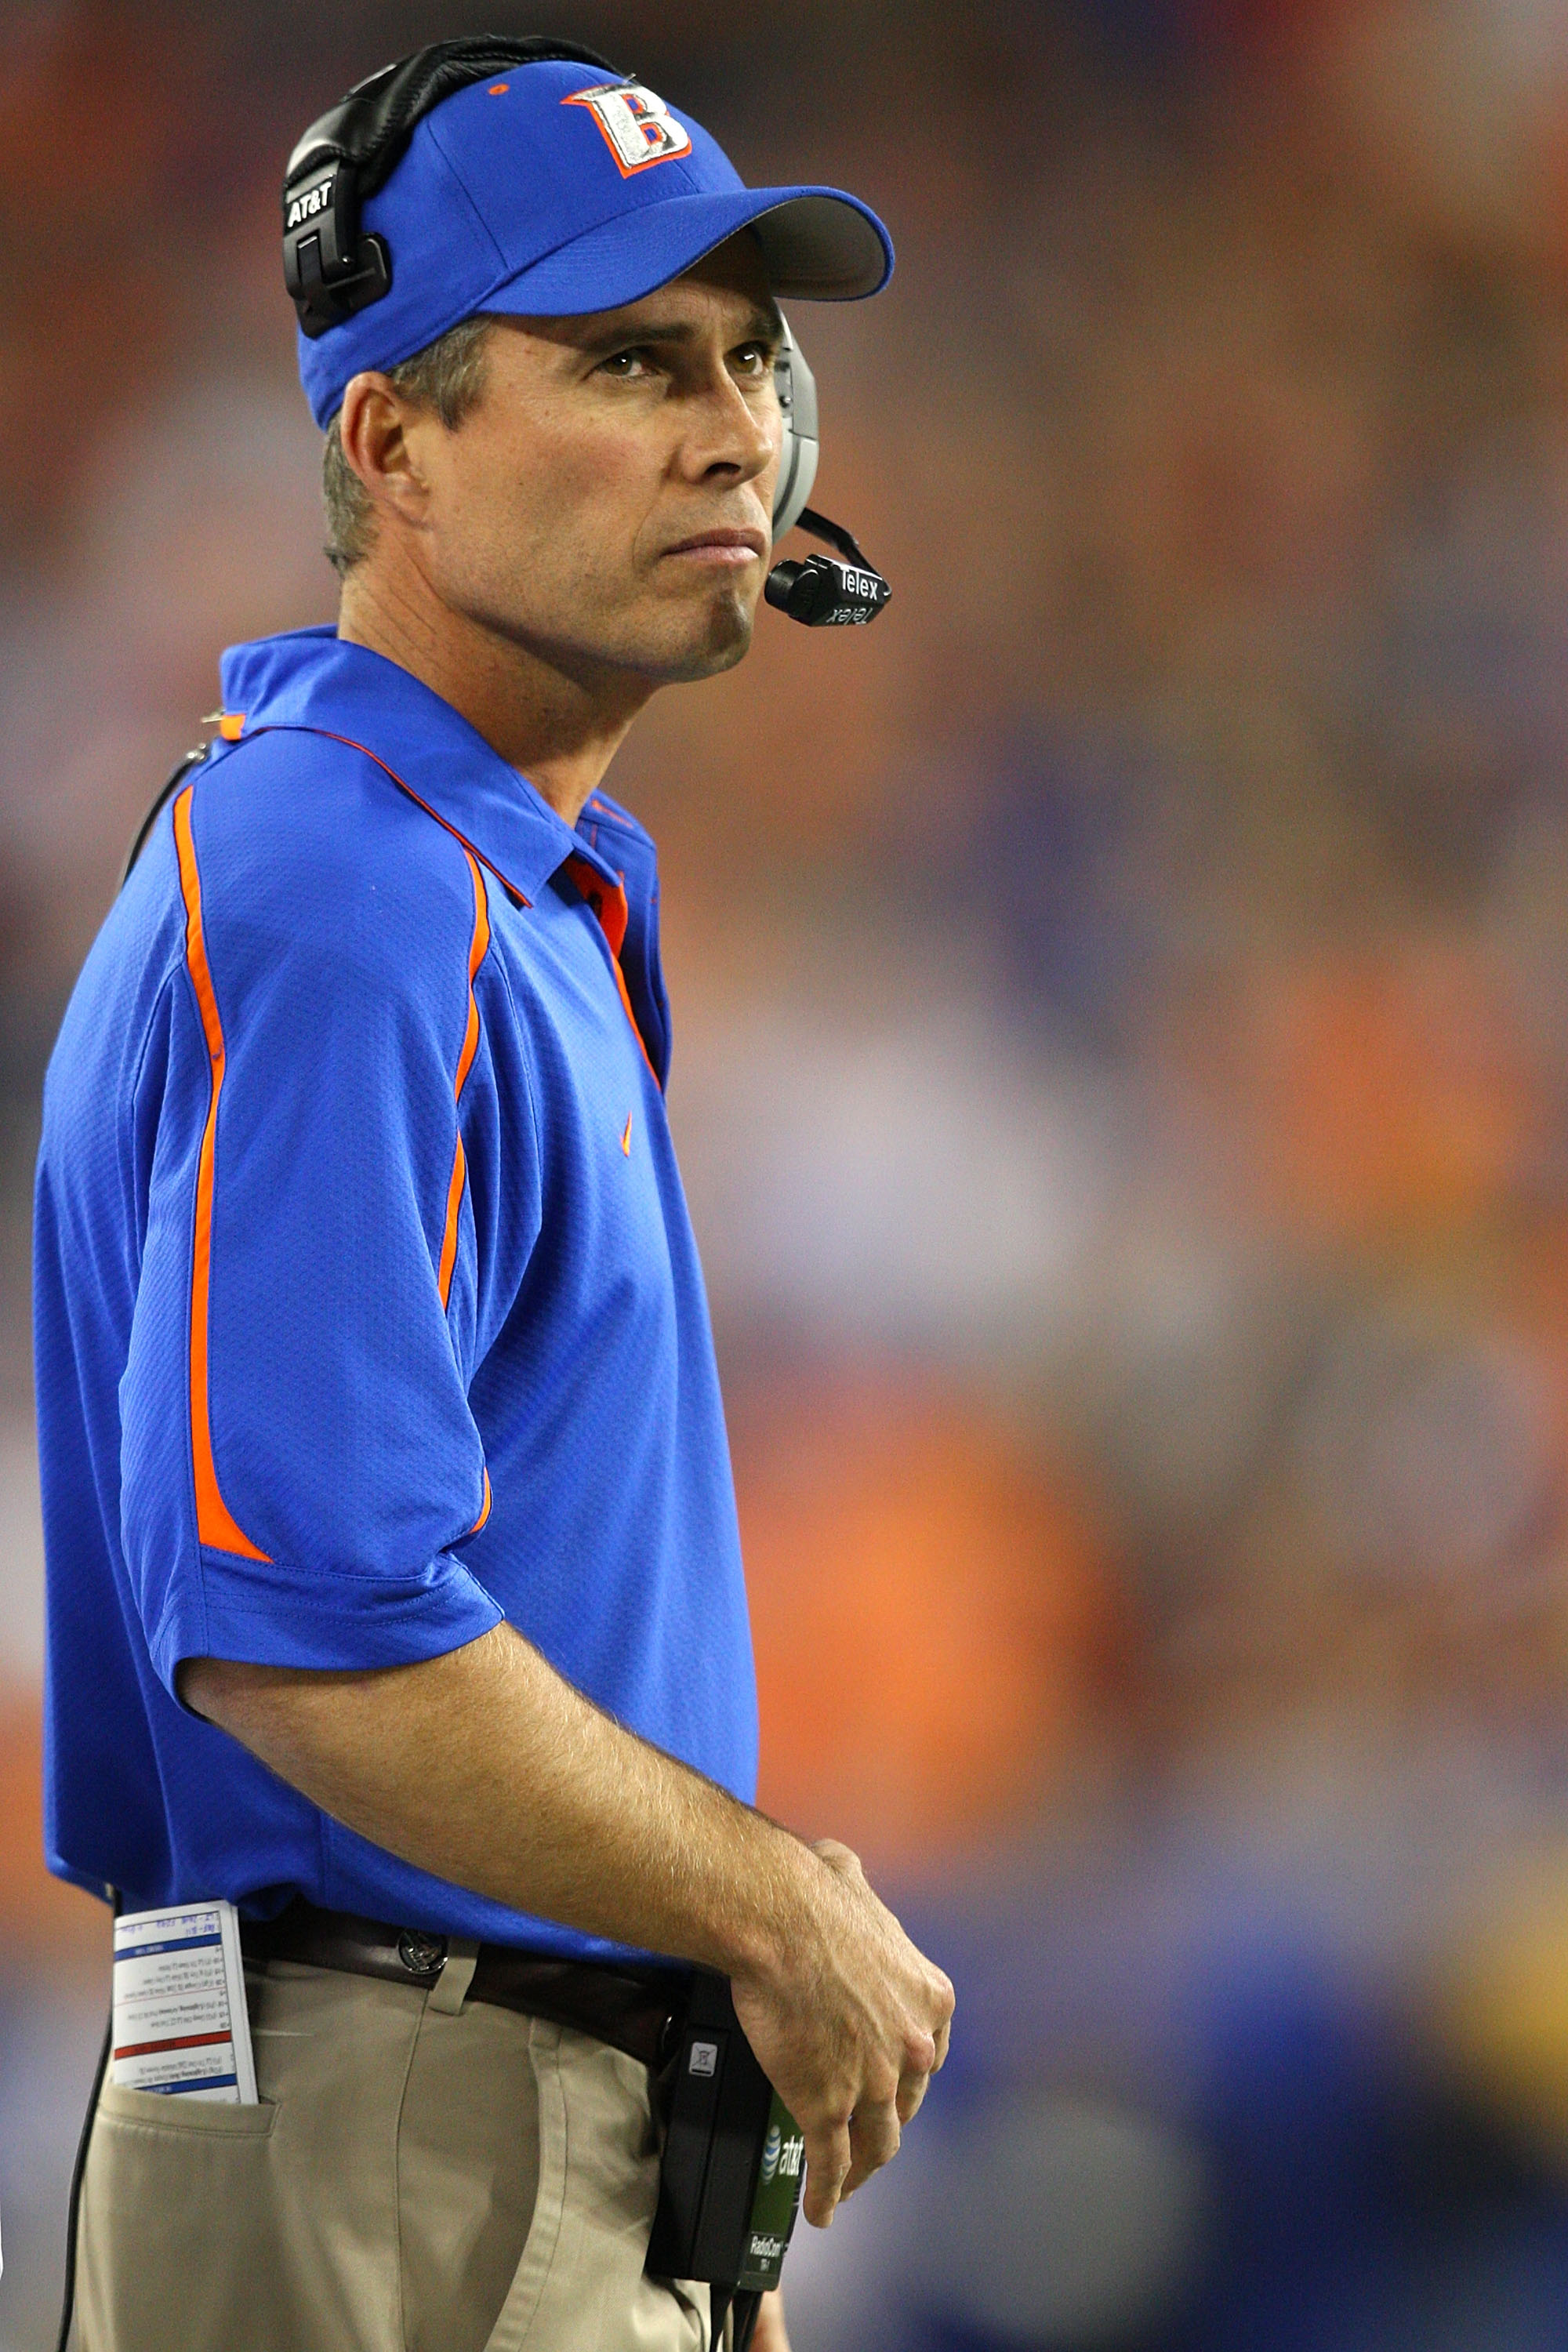 GLENDALE, AZ - JANUARY 04:  Head coach Chris Petersen of the Boise State Broncos looks on in the first half against the TCU Horned Frogs during the Tostitos Fiesta Bowl at the Universtity of Phoenix Stadium on January 4, 2010 in Glendale, Arizona.  (Photo